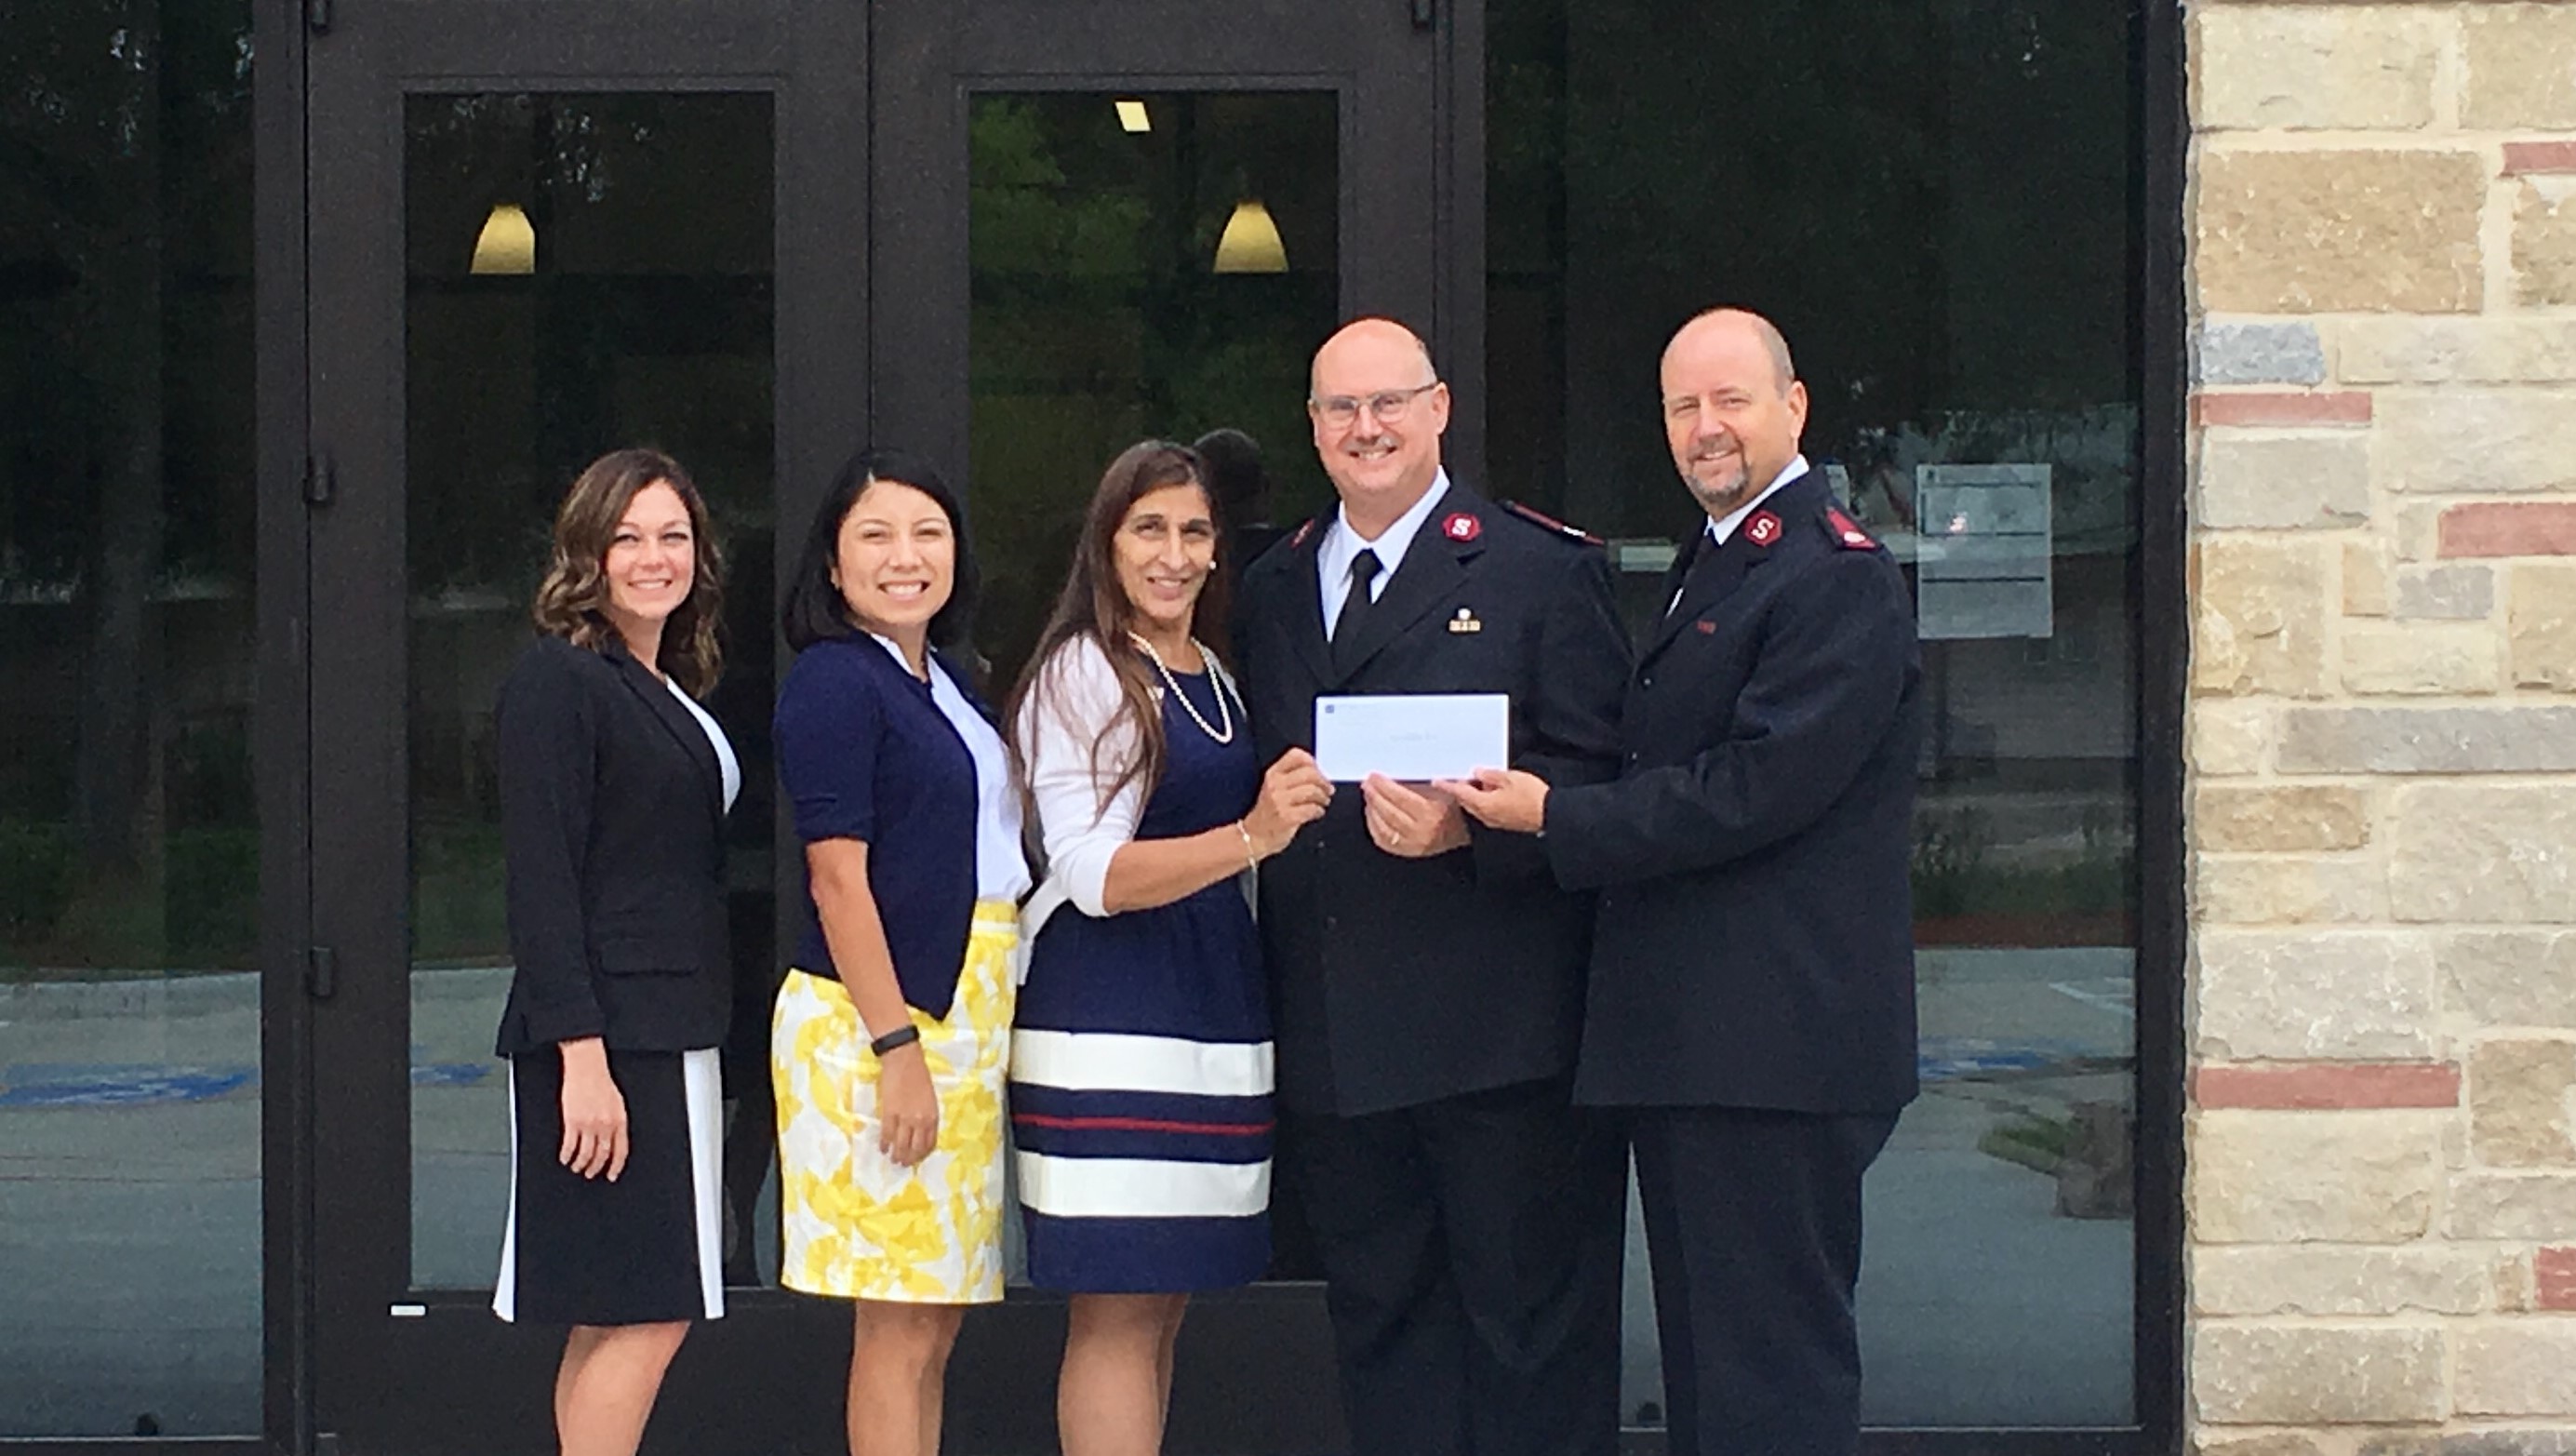 The Salvation Army received $50,000 from Woodforest Charitable Foundation.